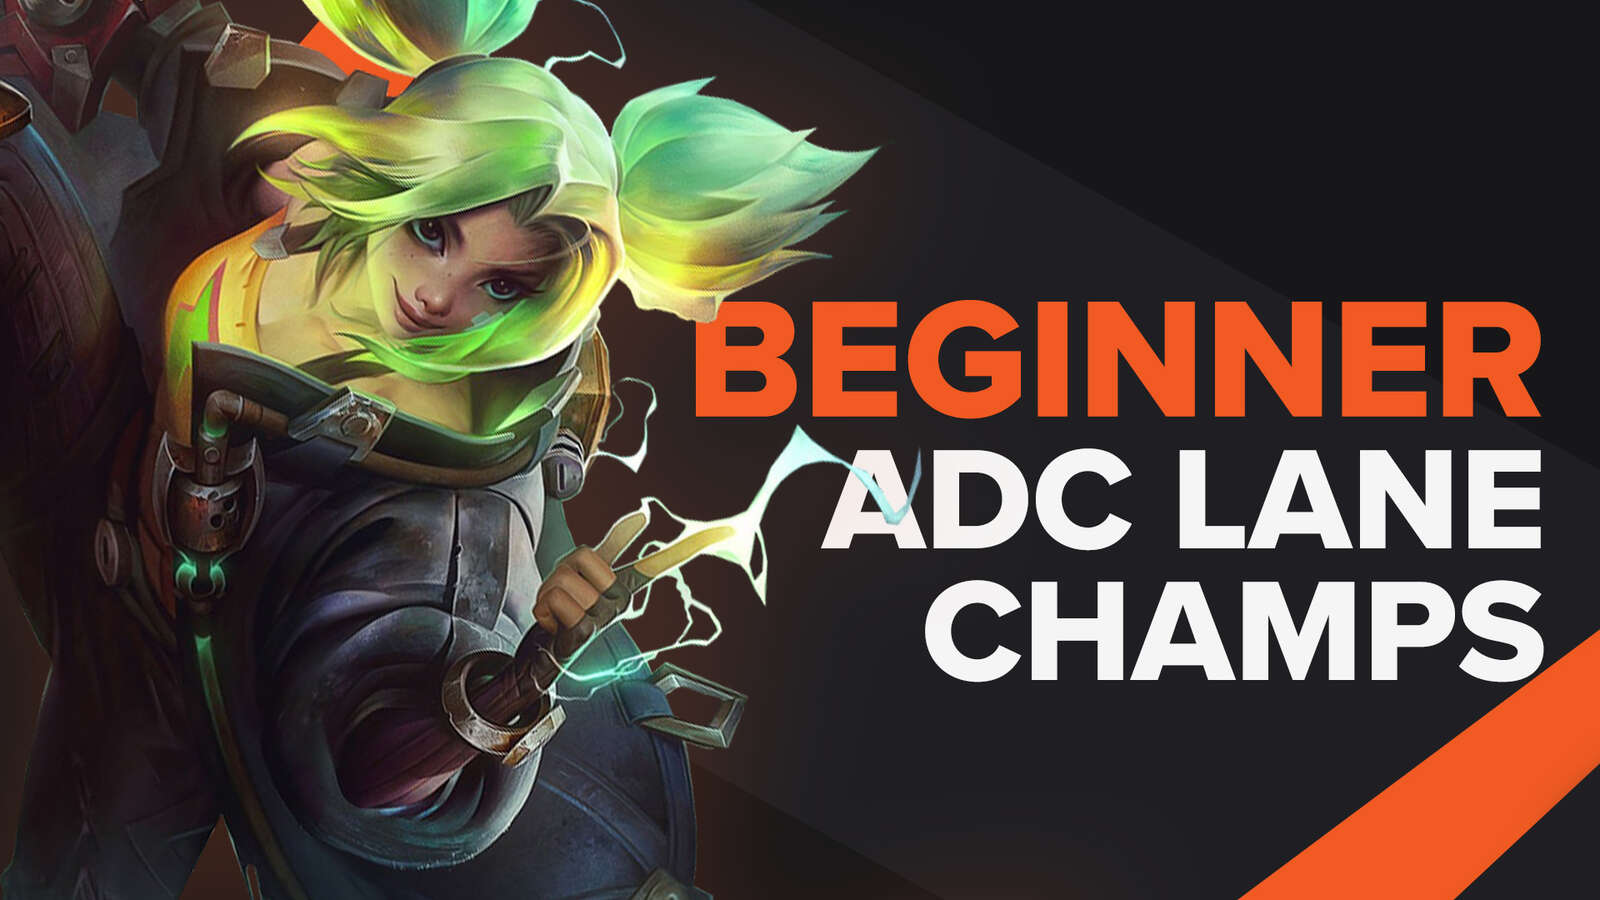 Best Beginner LoL Champions to Learn the ADC Role With